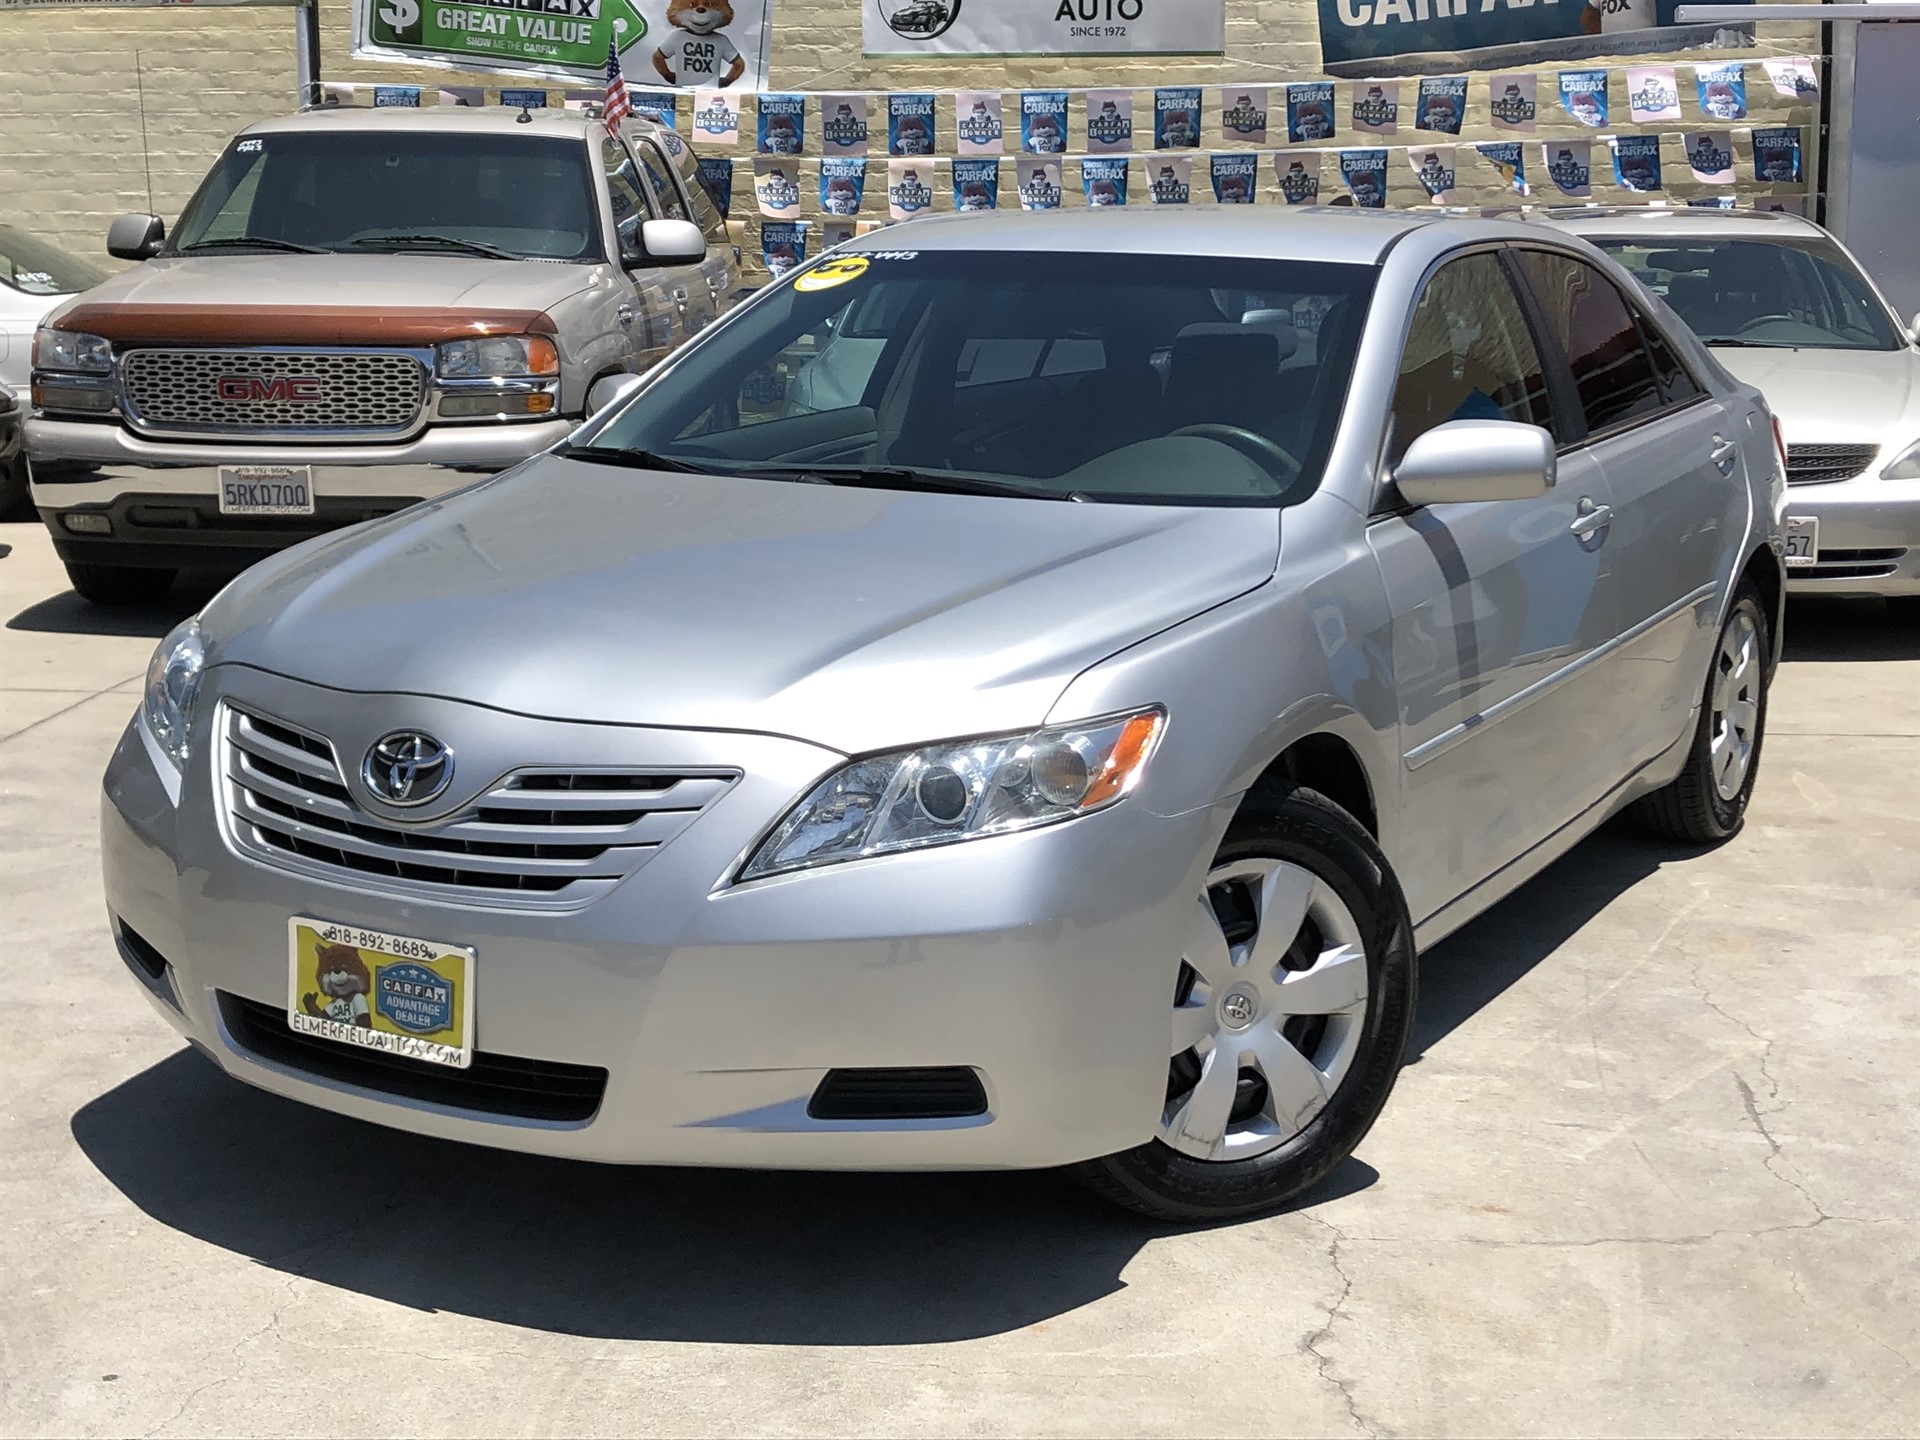 2007 Toyota Camry LE - Low Miles!